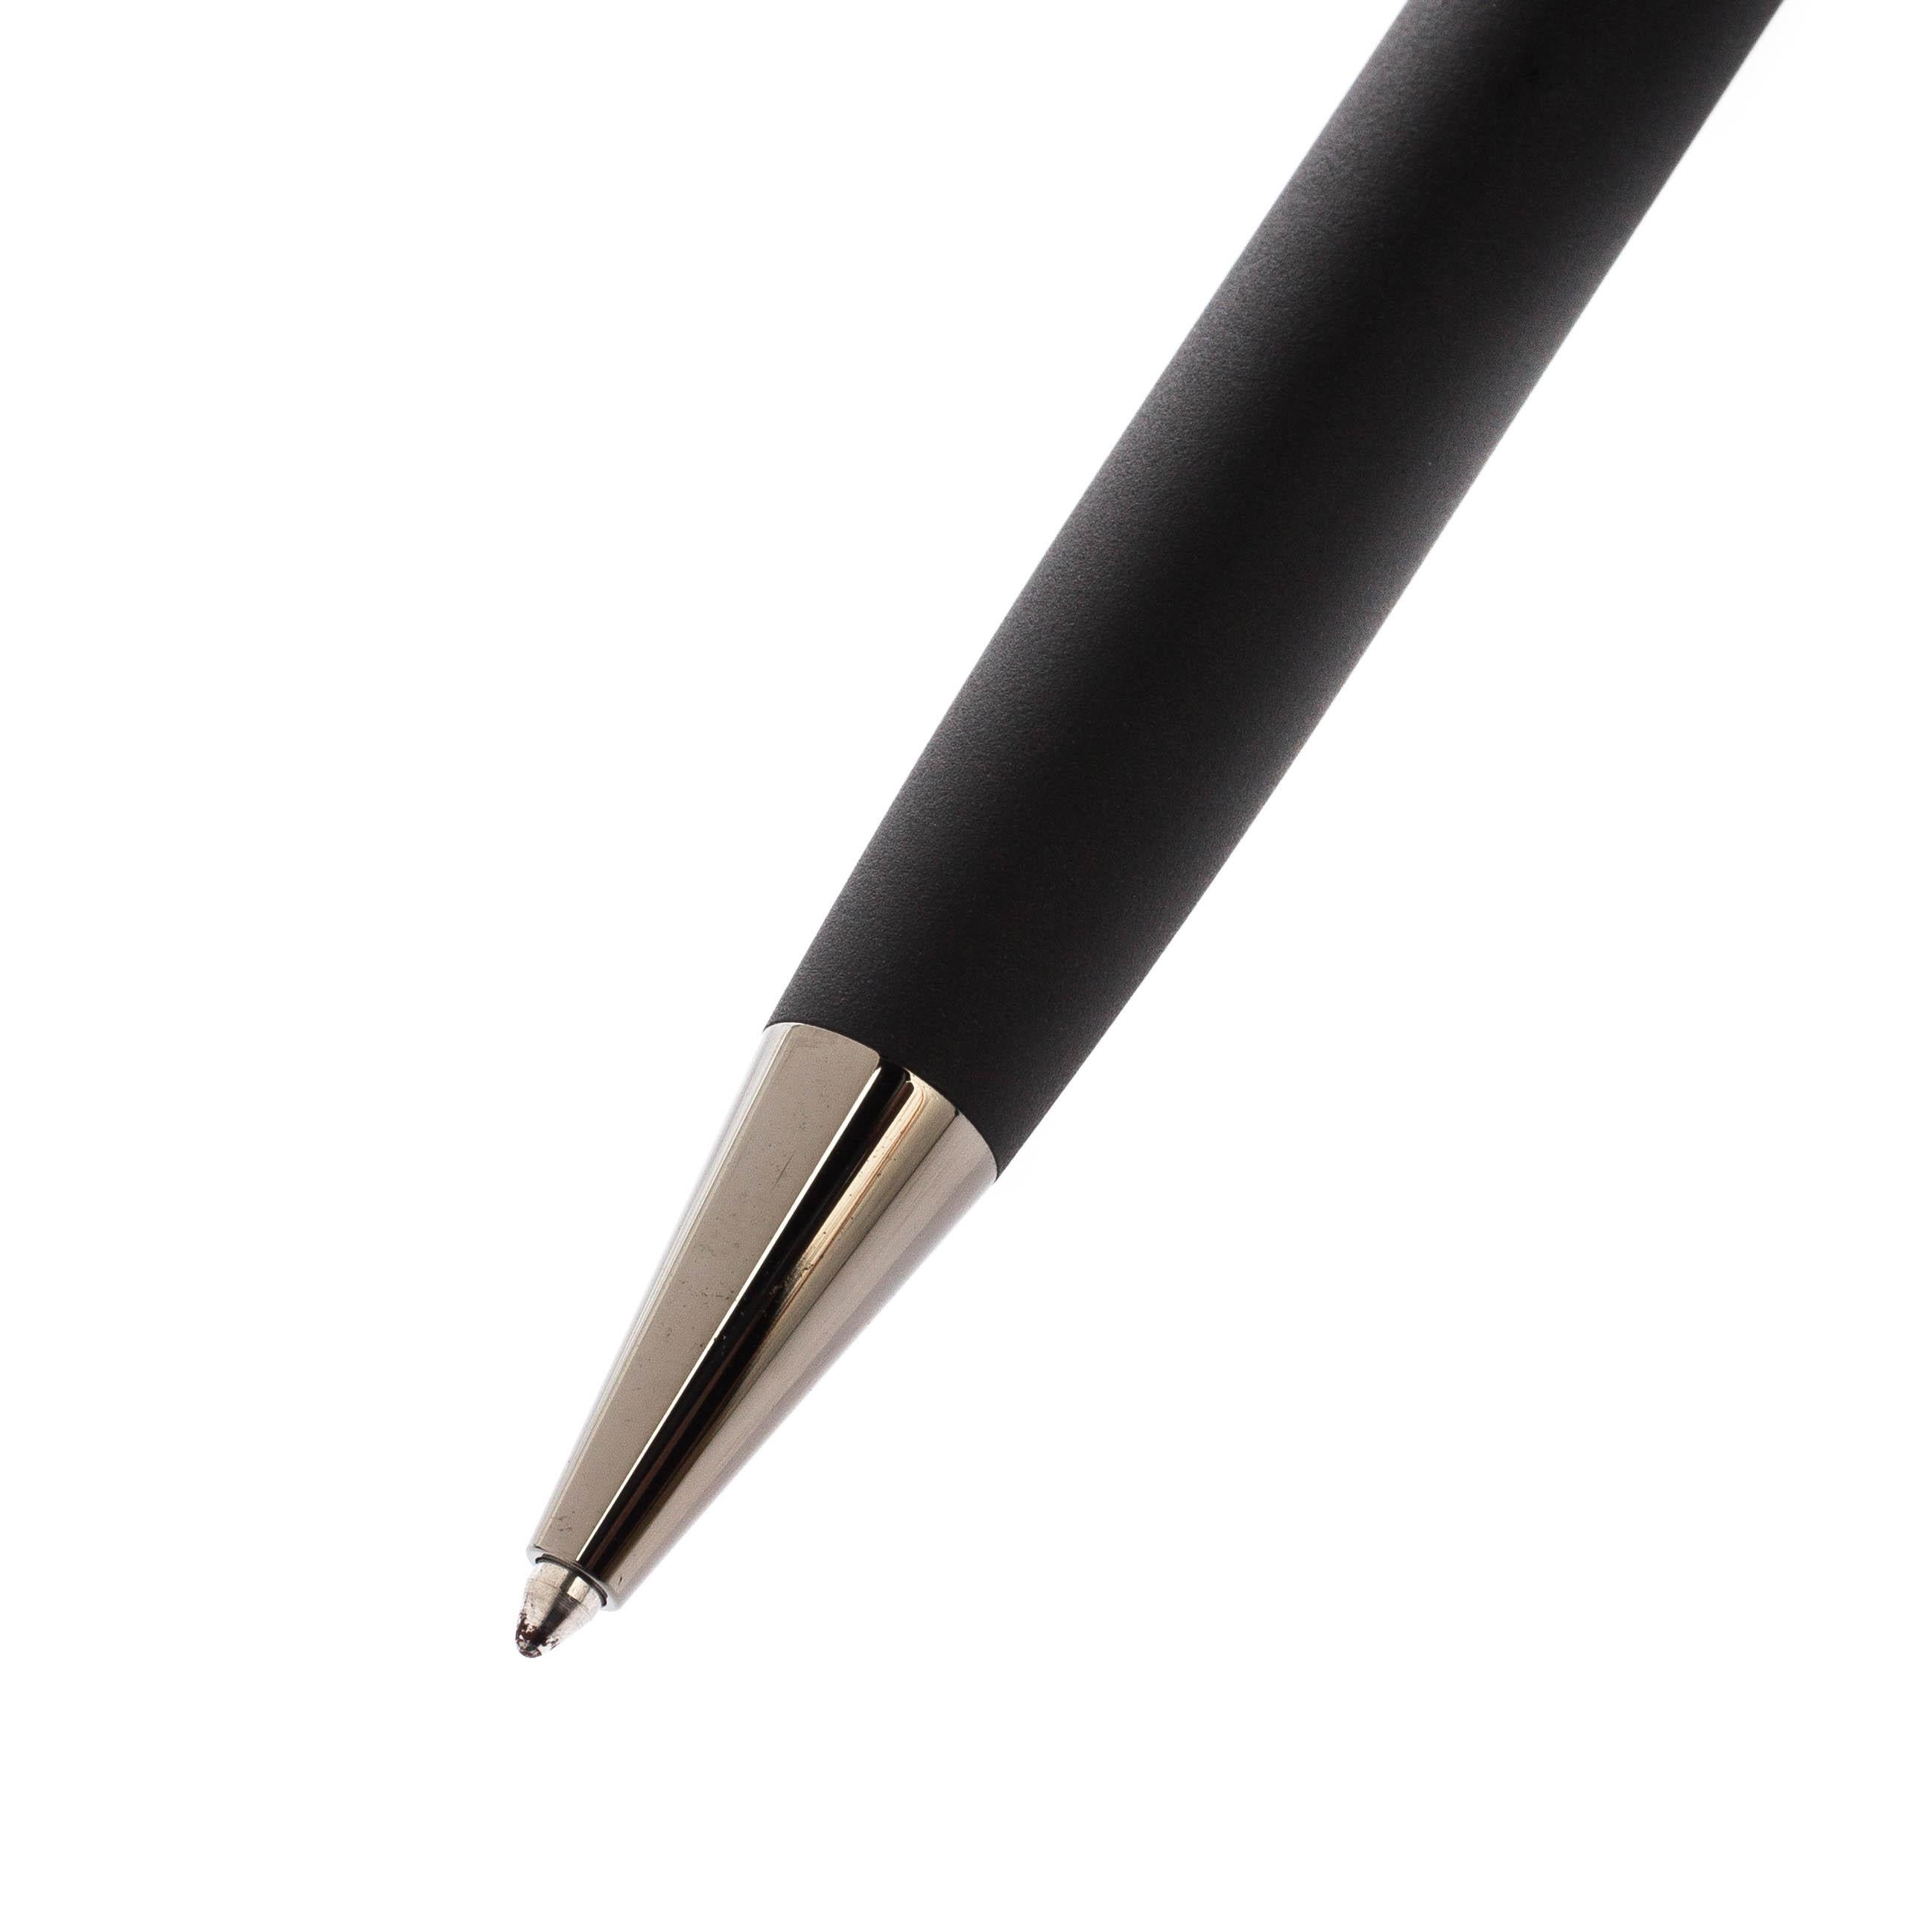 Montblanc brings you this lovely ballpoint pen that has been gorgeously coated in matte black and fitted with black finish metal. It has a pocket clip and the star logo on the top. Filled with black ink, the pen is a creation that defines quality